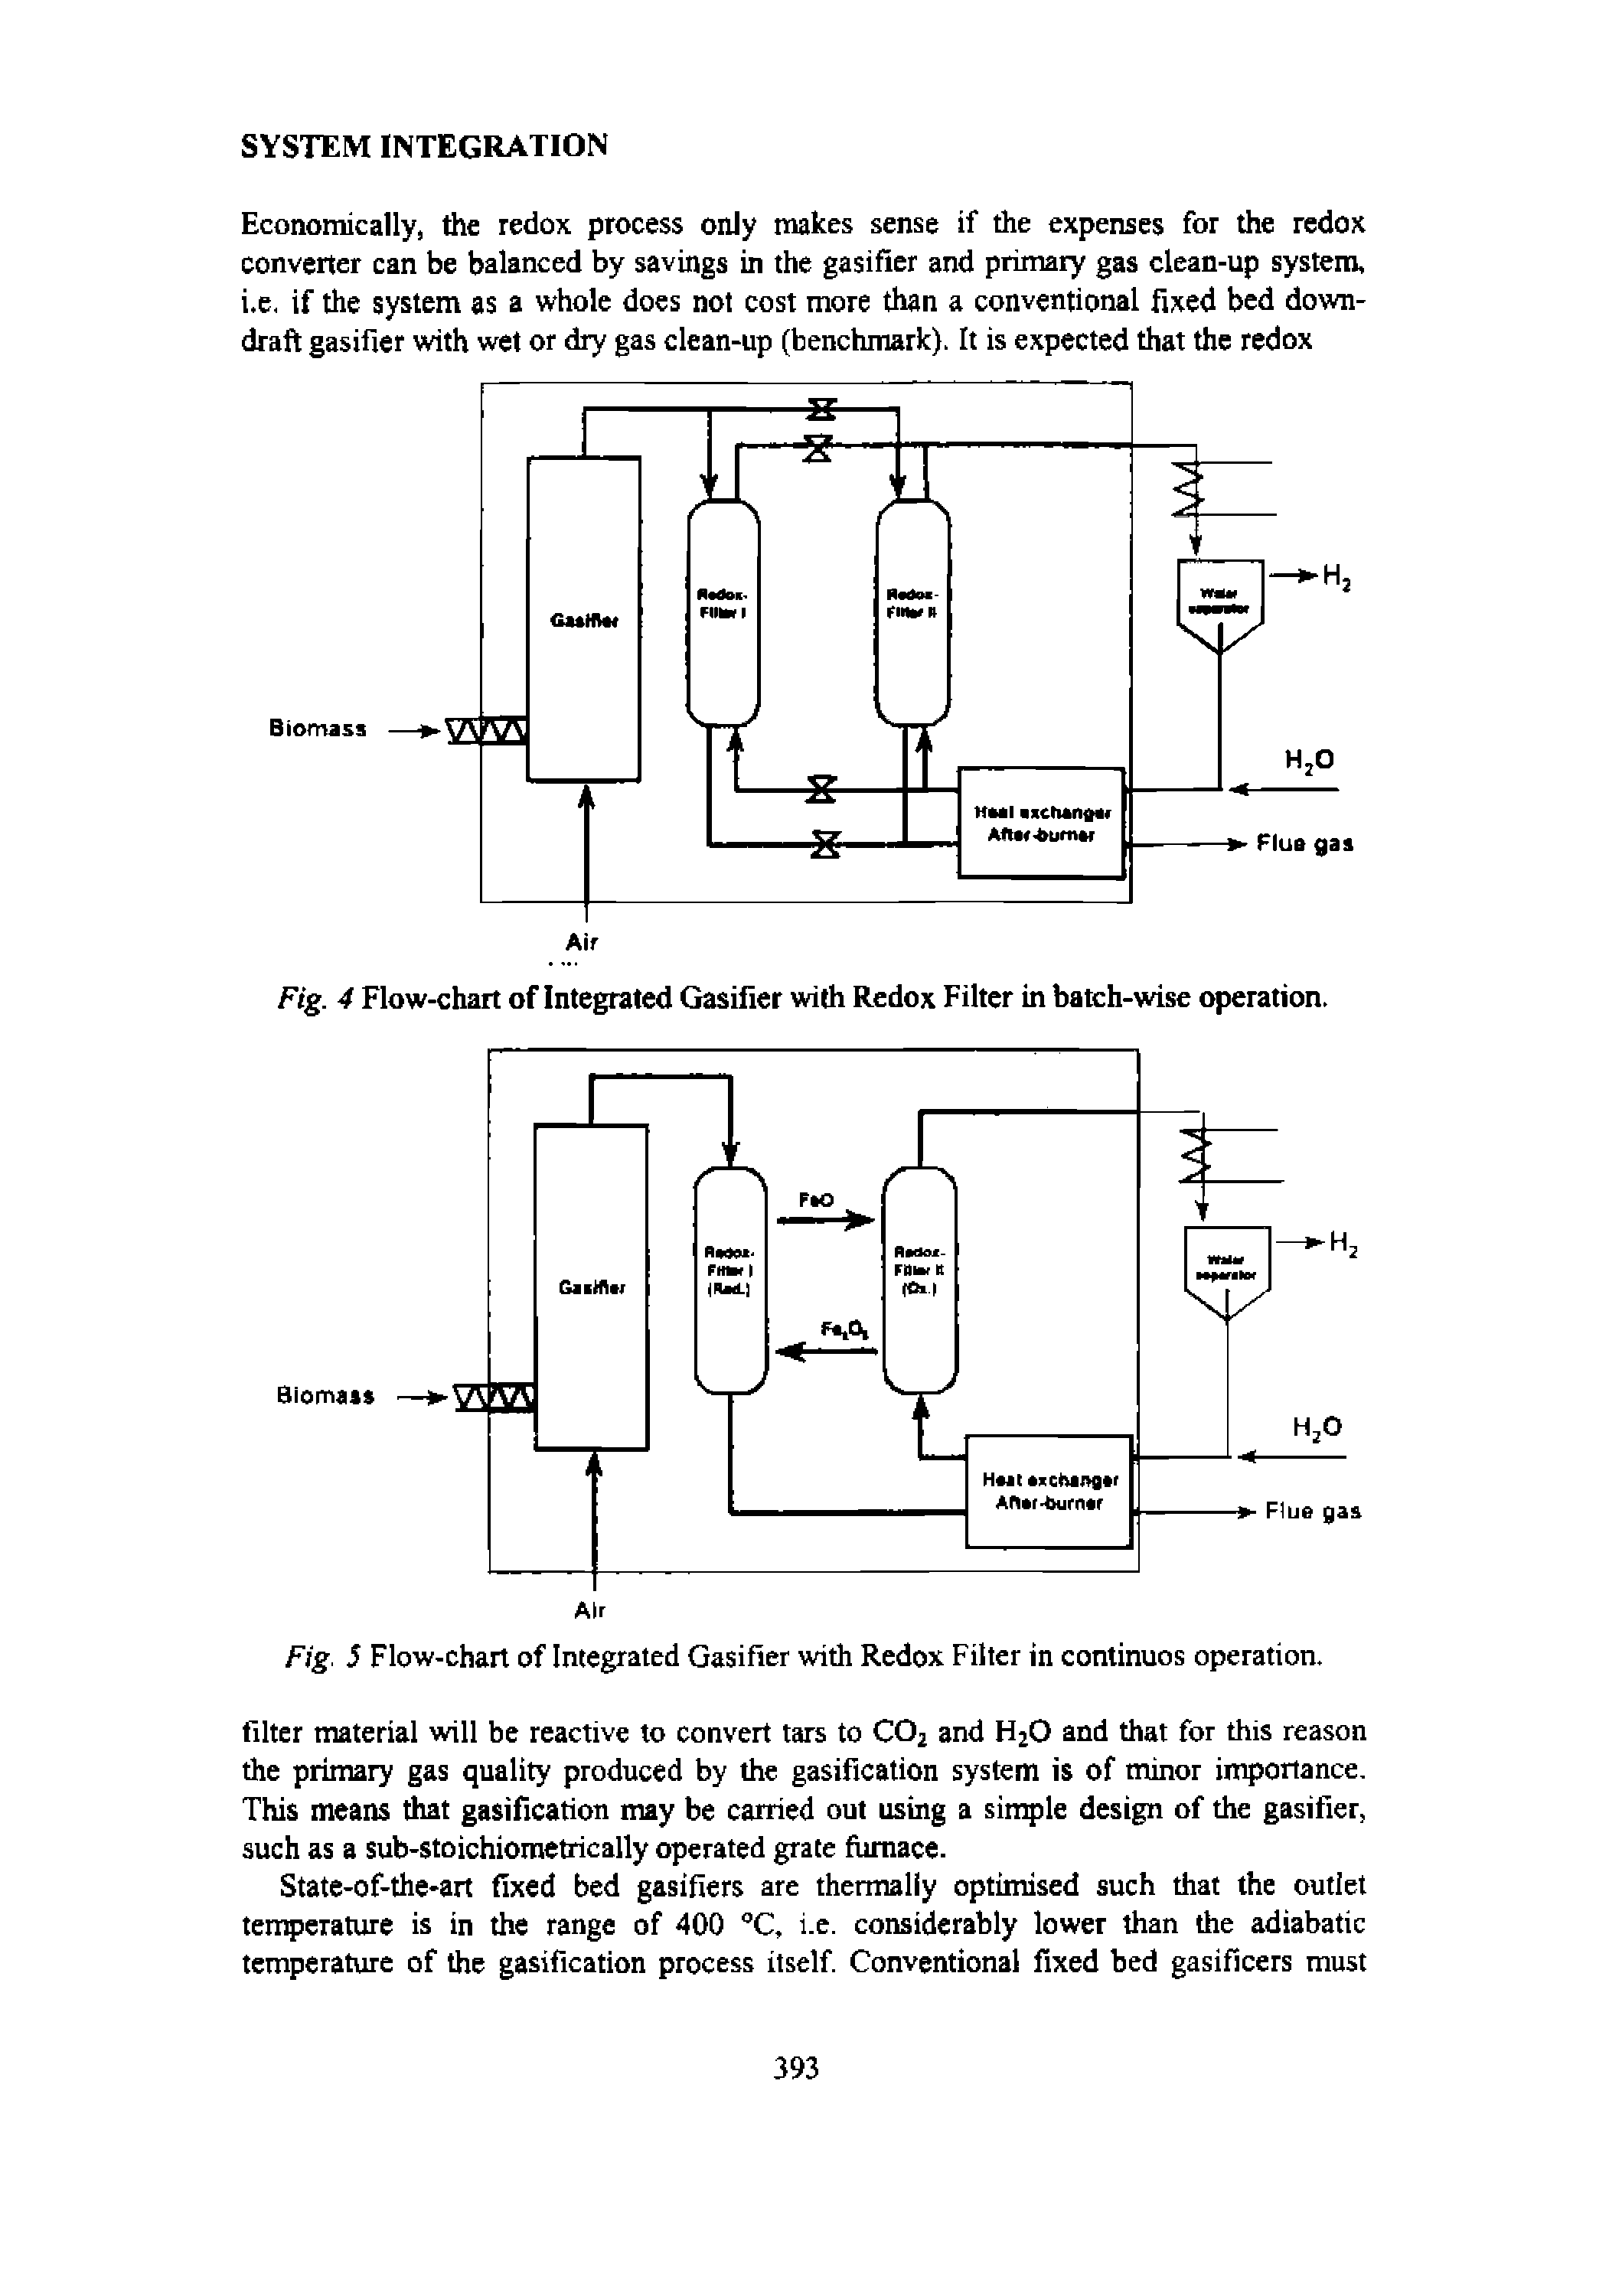 Fig. 4 Flow-chart of Integrated Gasifier with Redox Filter in batch-wise operation.